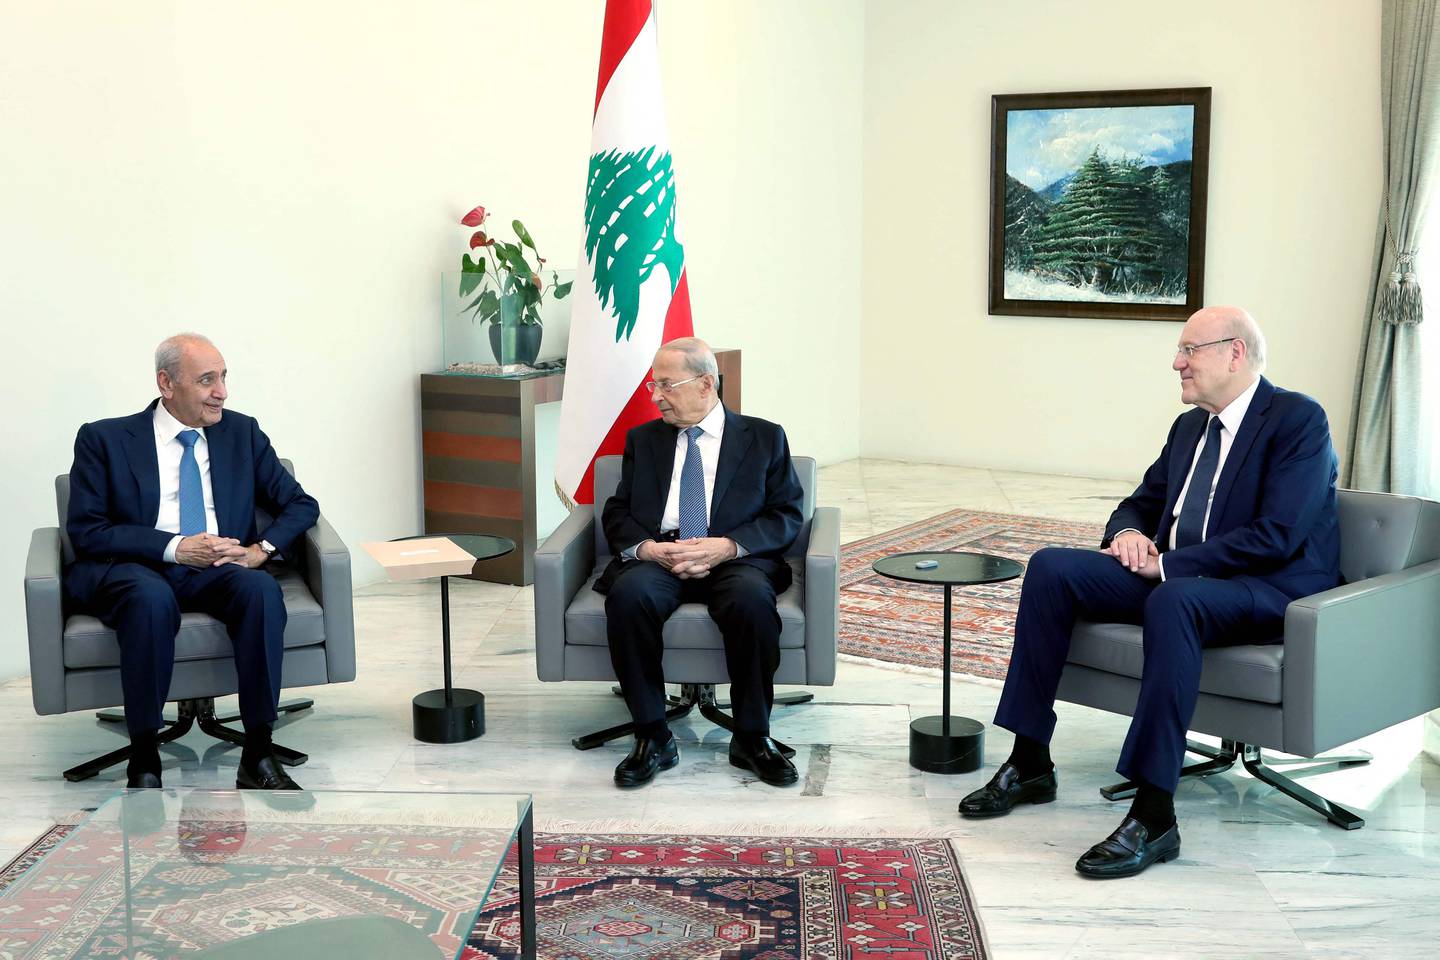 Lebanon's President Michel Aoun (C) meeting with parliament speaker Nabih Berri and Prime Minister-designate Najib Mikati(R) at the presidential palace in Baabda, east of the capital Beirut, on June 23. AFP